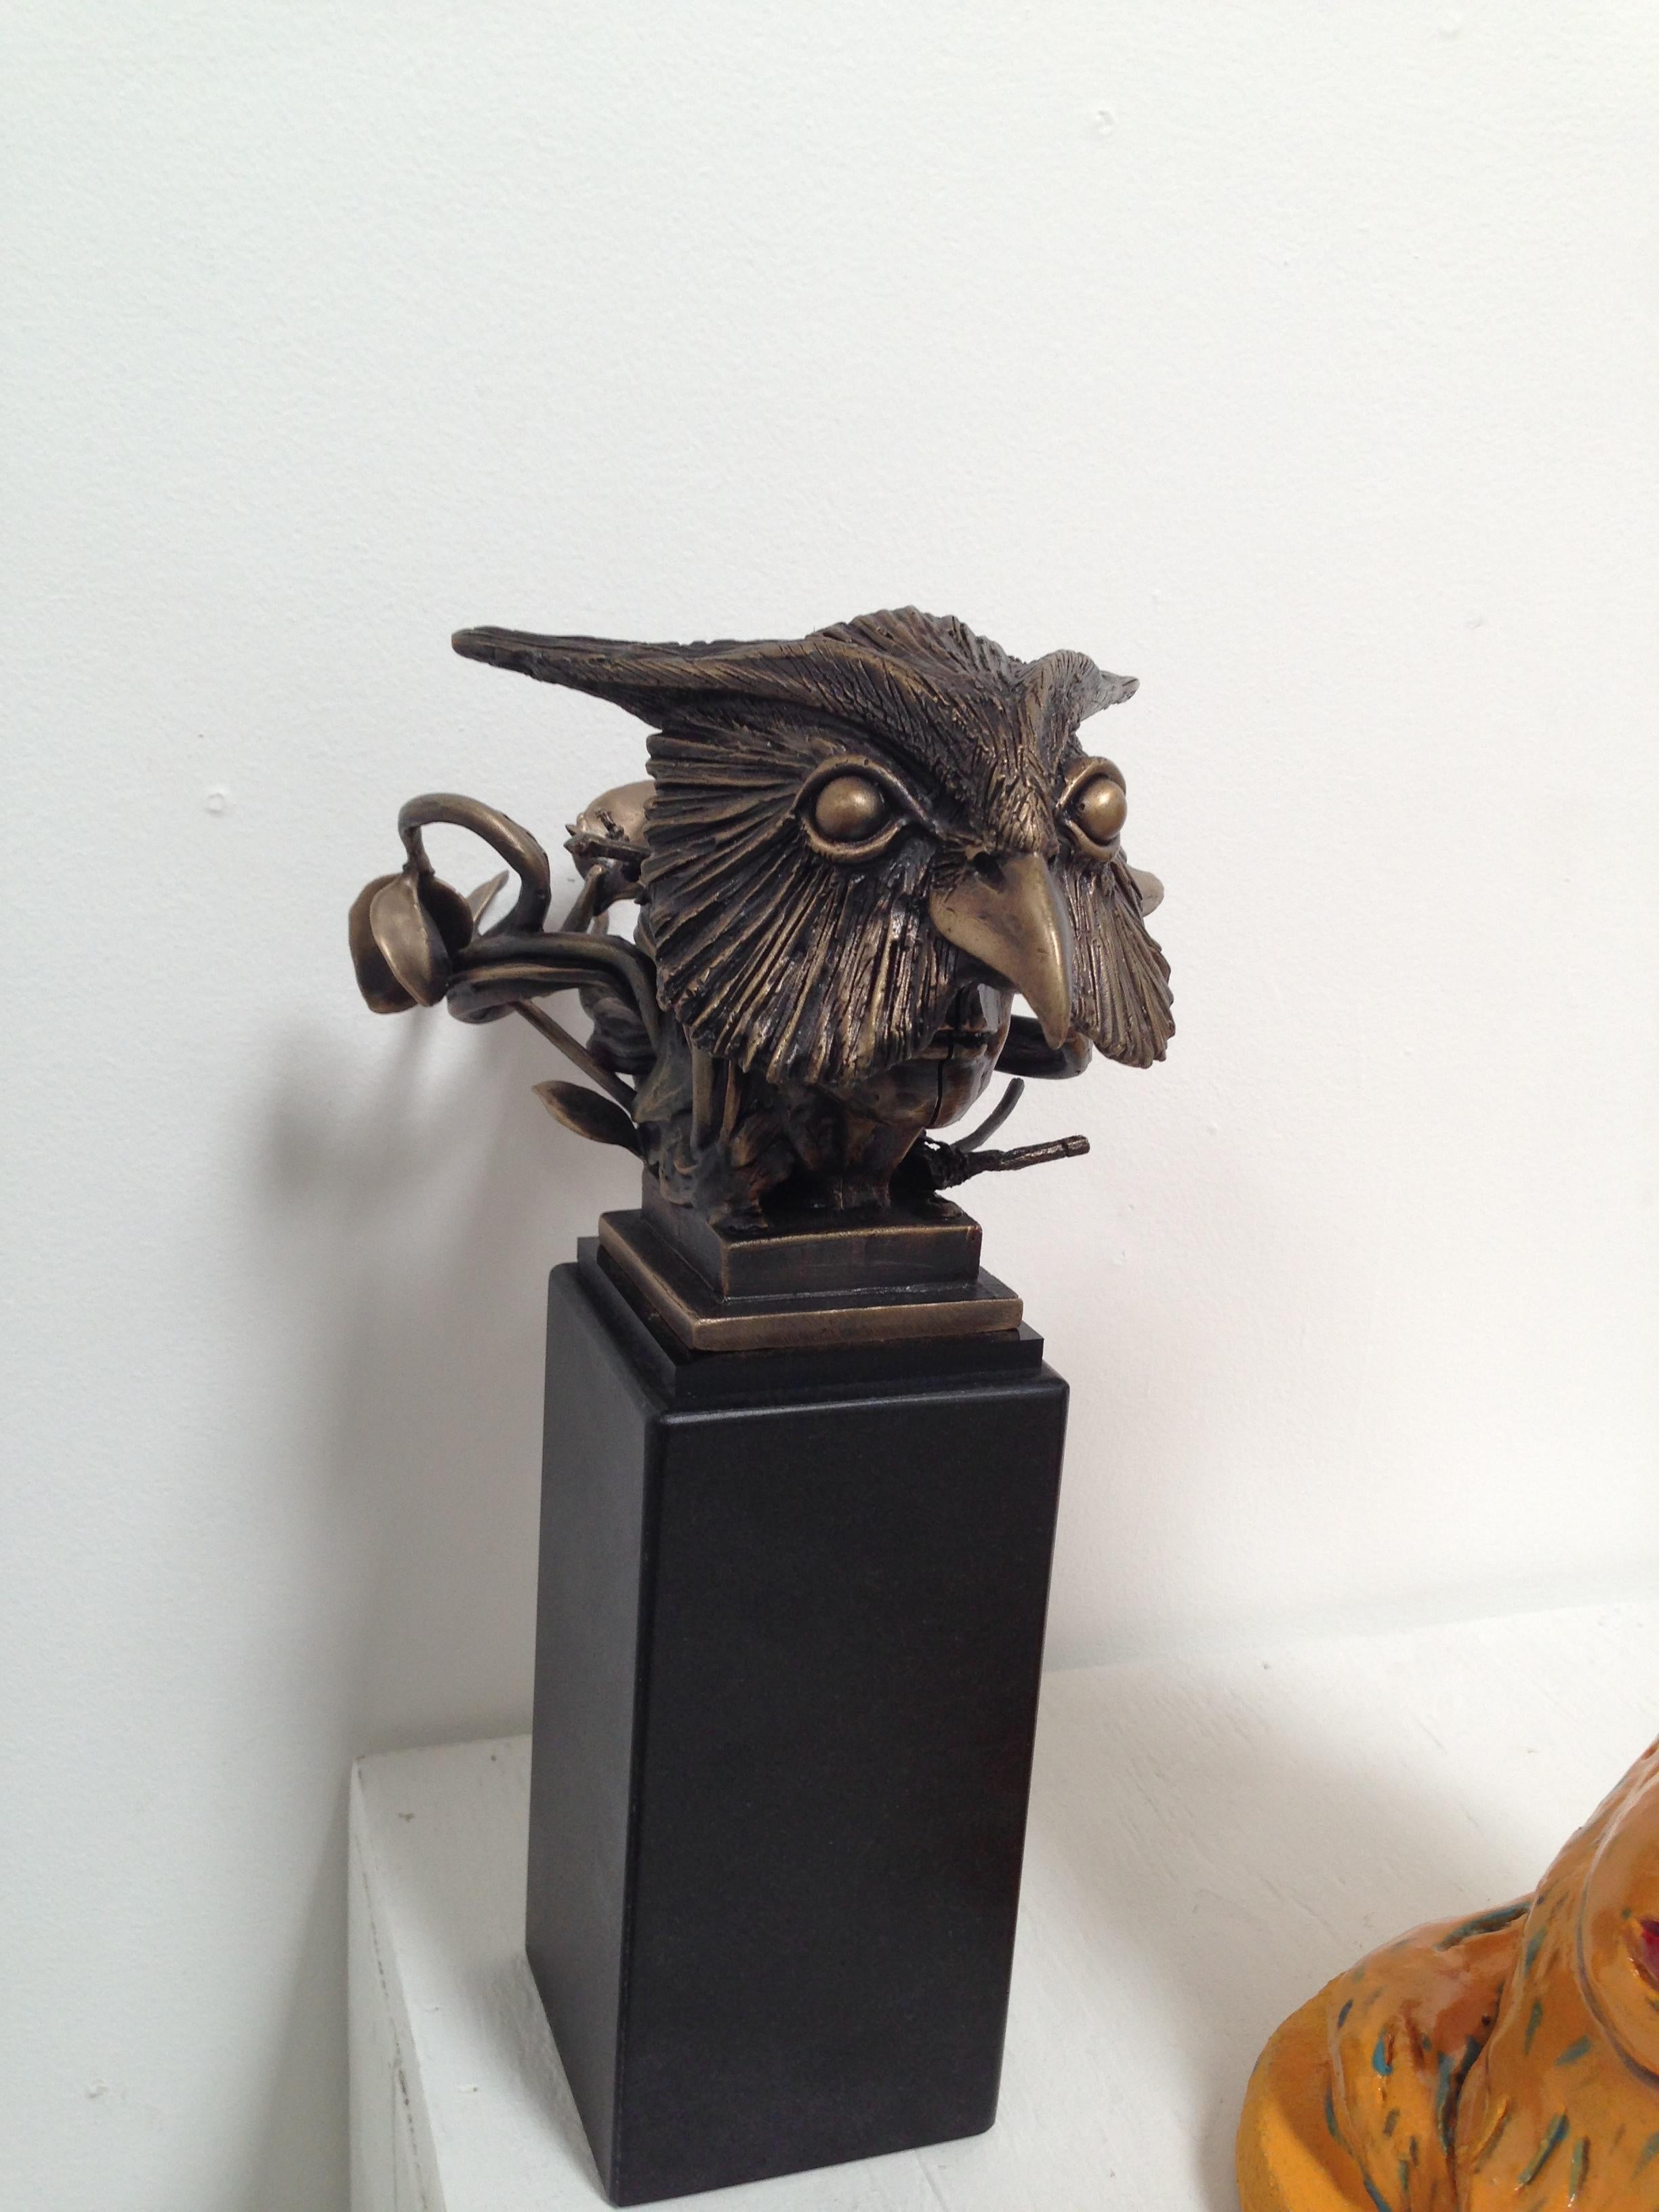 Owl - Sculpture by Ted Gall